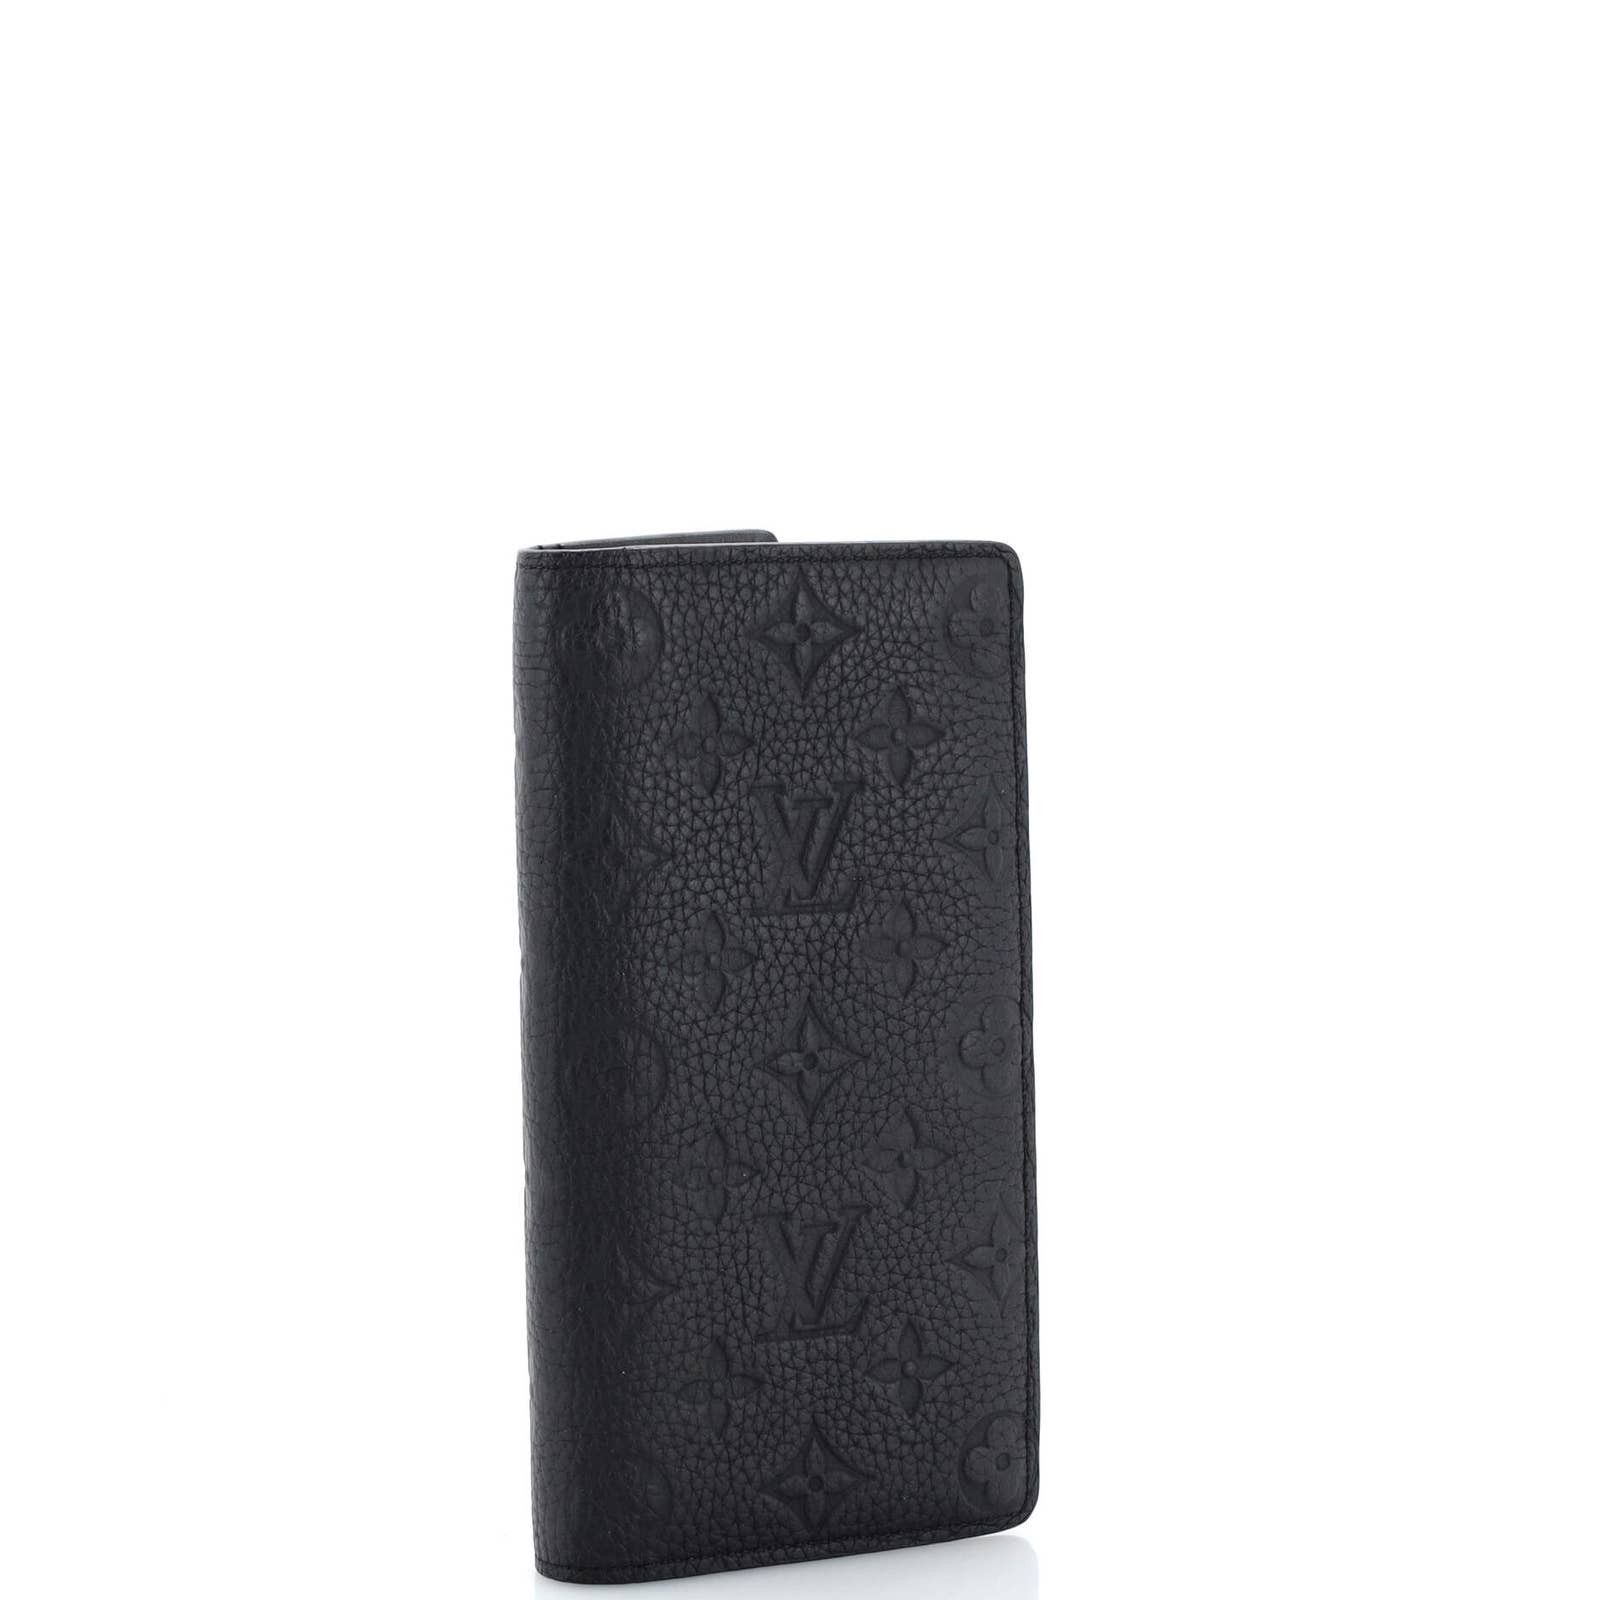 Brazza Wallet Monogram Taurillon Leather LG - G90 - Wallets and Small  Leather Goods M69038